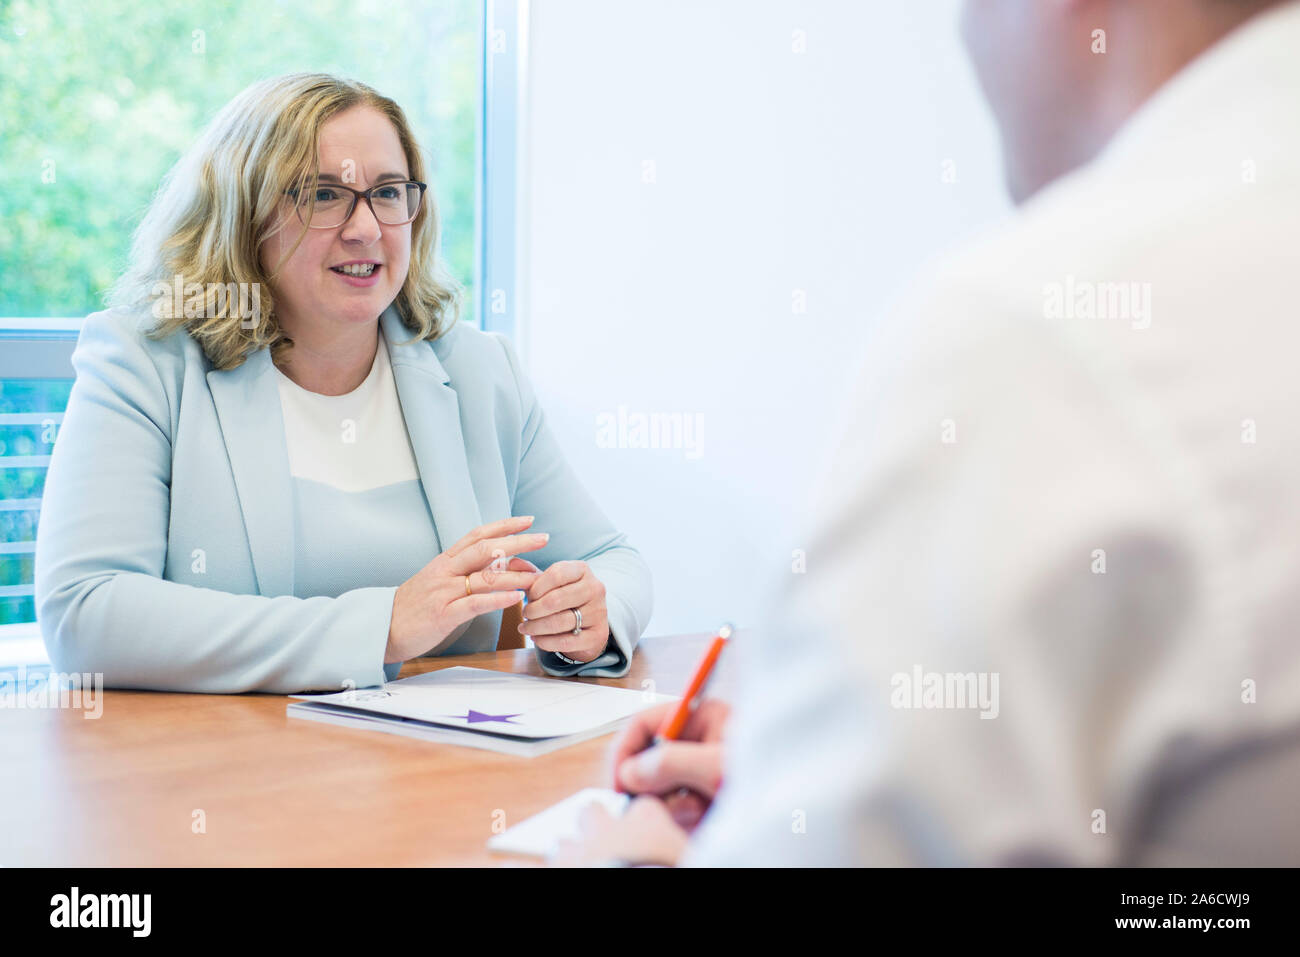 two people sat at a table having a meeting or a job interview Stock Photo